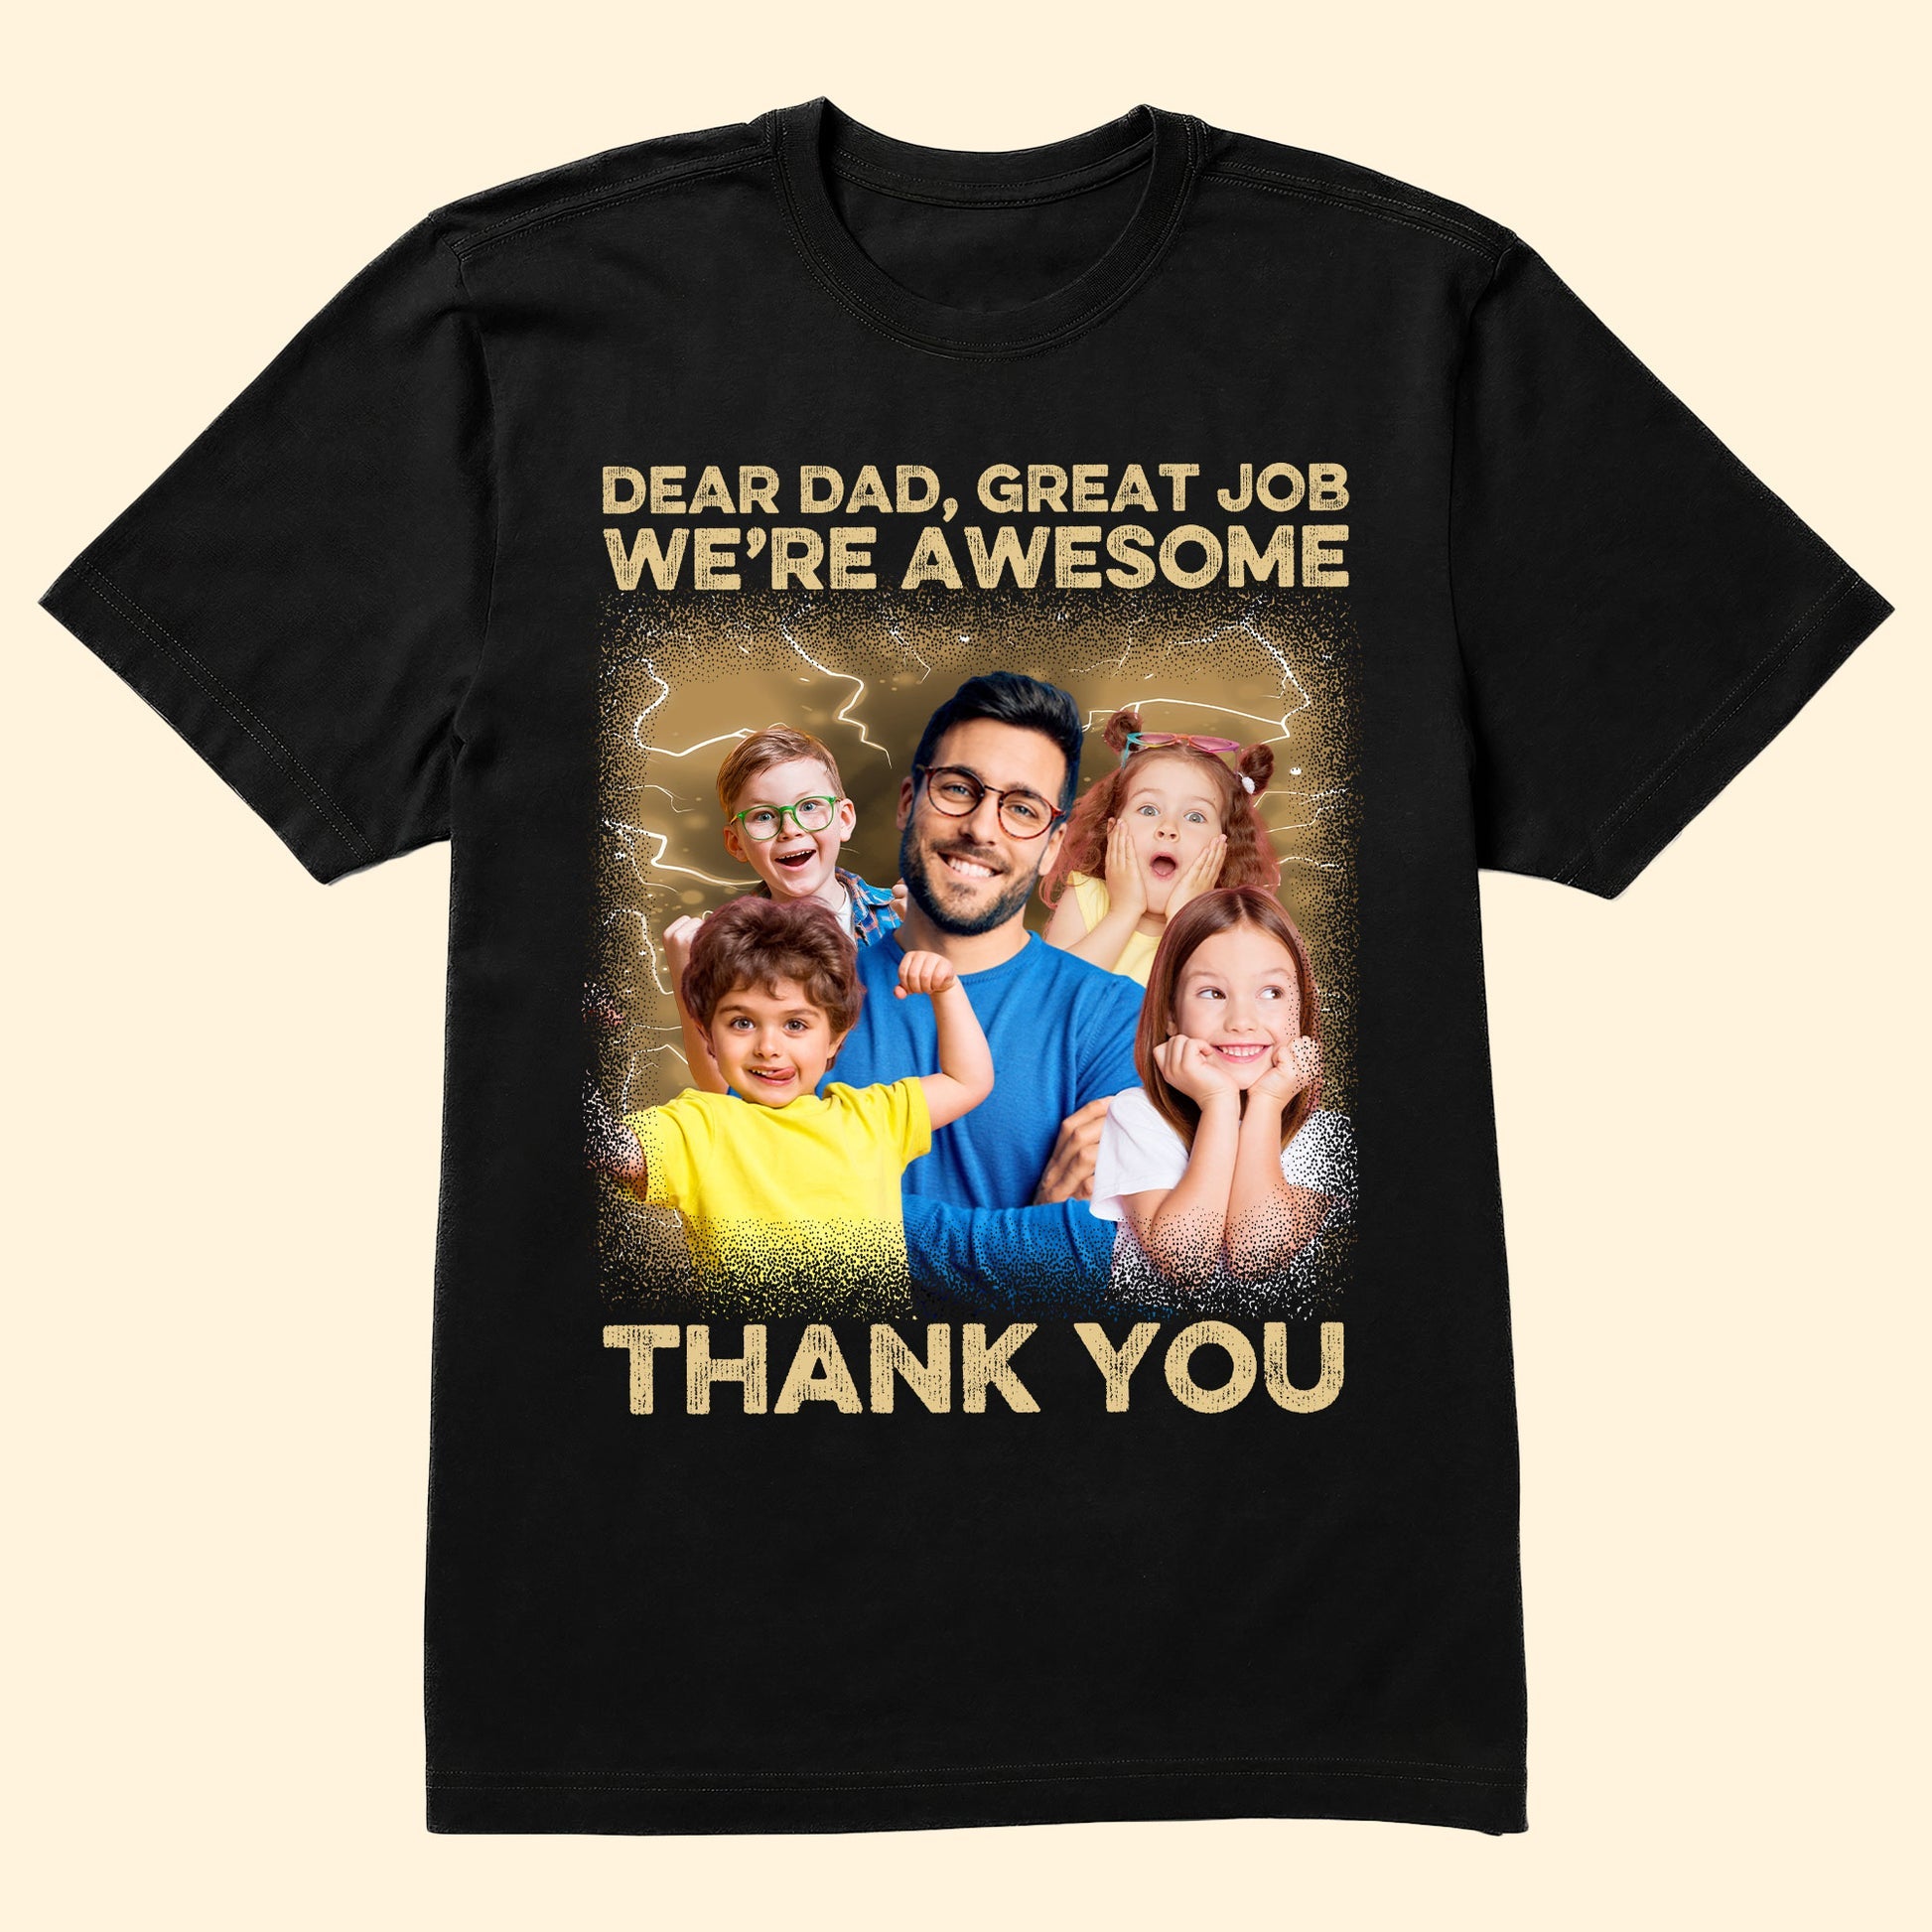 Great Job We're Awesome Vintage Bootleg Tee - Personalized Photo Shirt For Dad